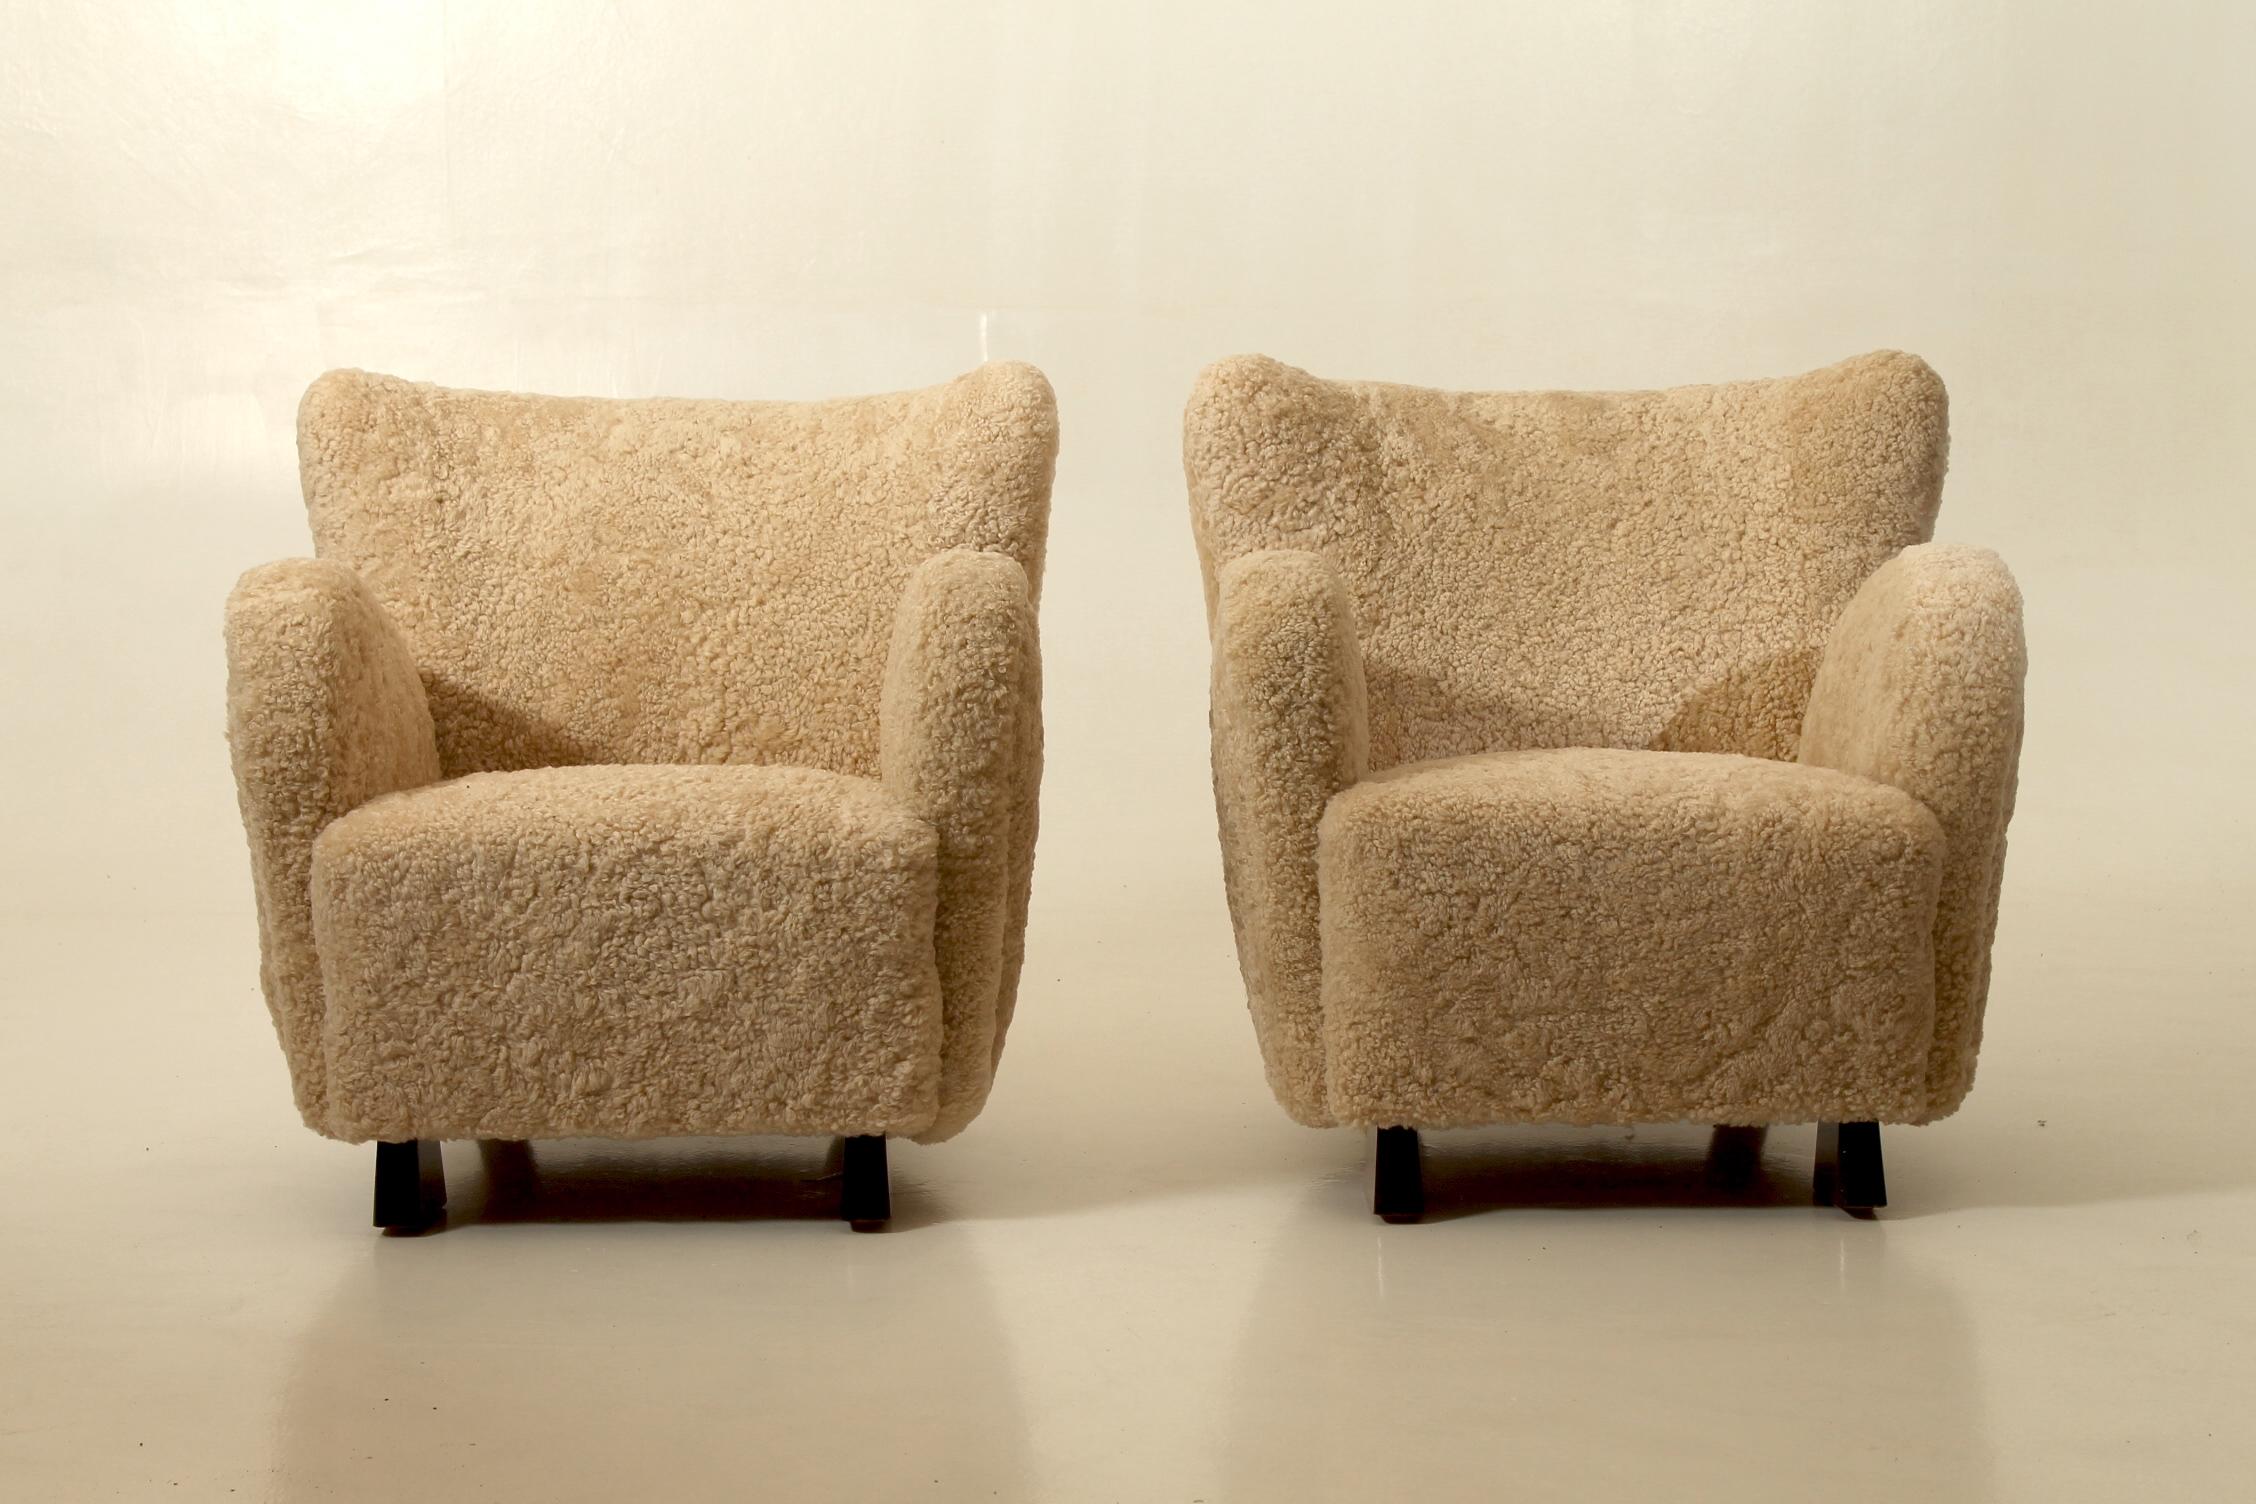 Rare pair of easy chairs designed by Flemming Lassen. Produced by cabinetmarker A.J Iversen, Denmark. Reupholstered in sheepskin. Designed and prodiced in the 1940s, Denmark.